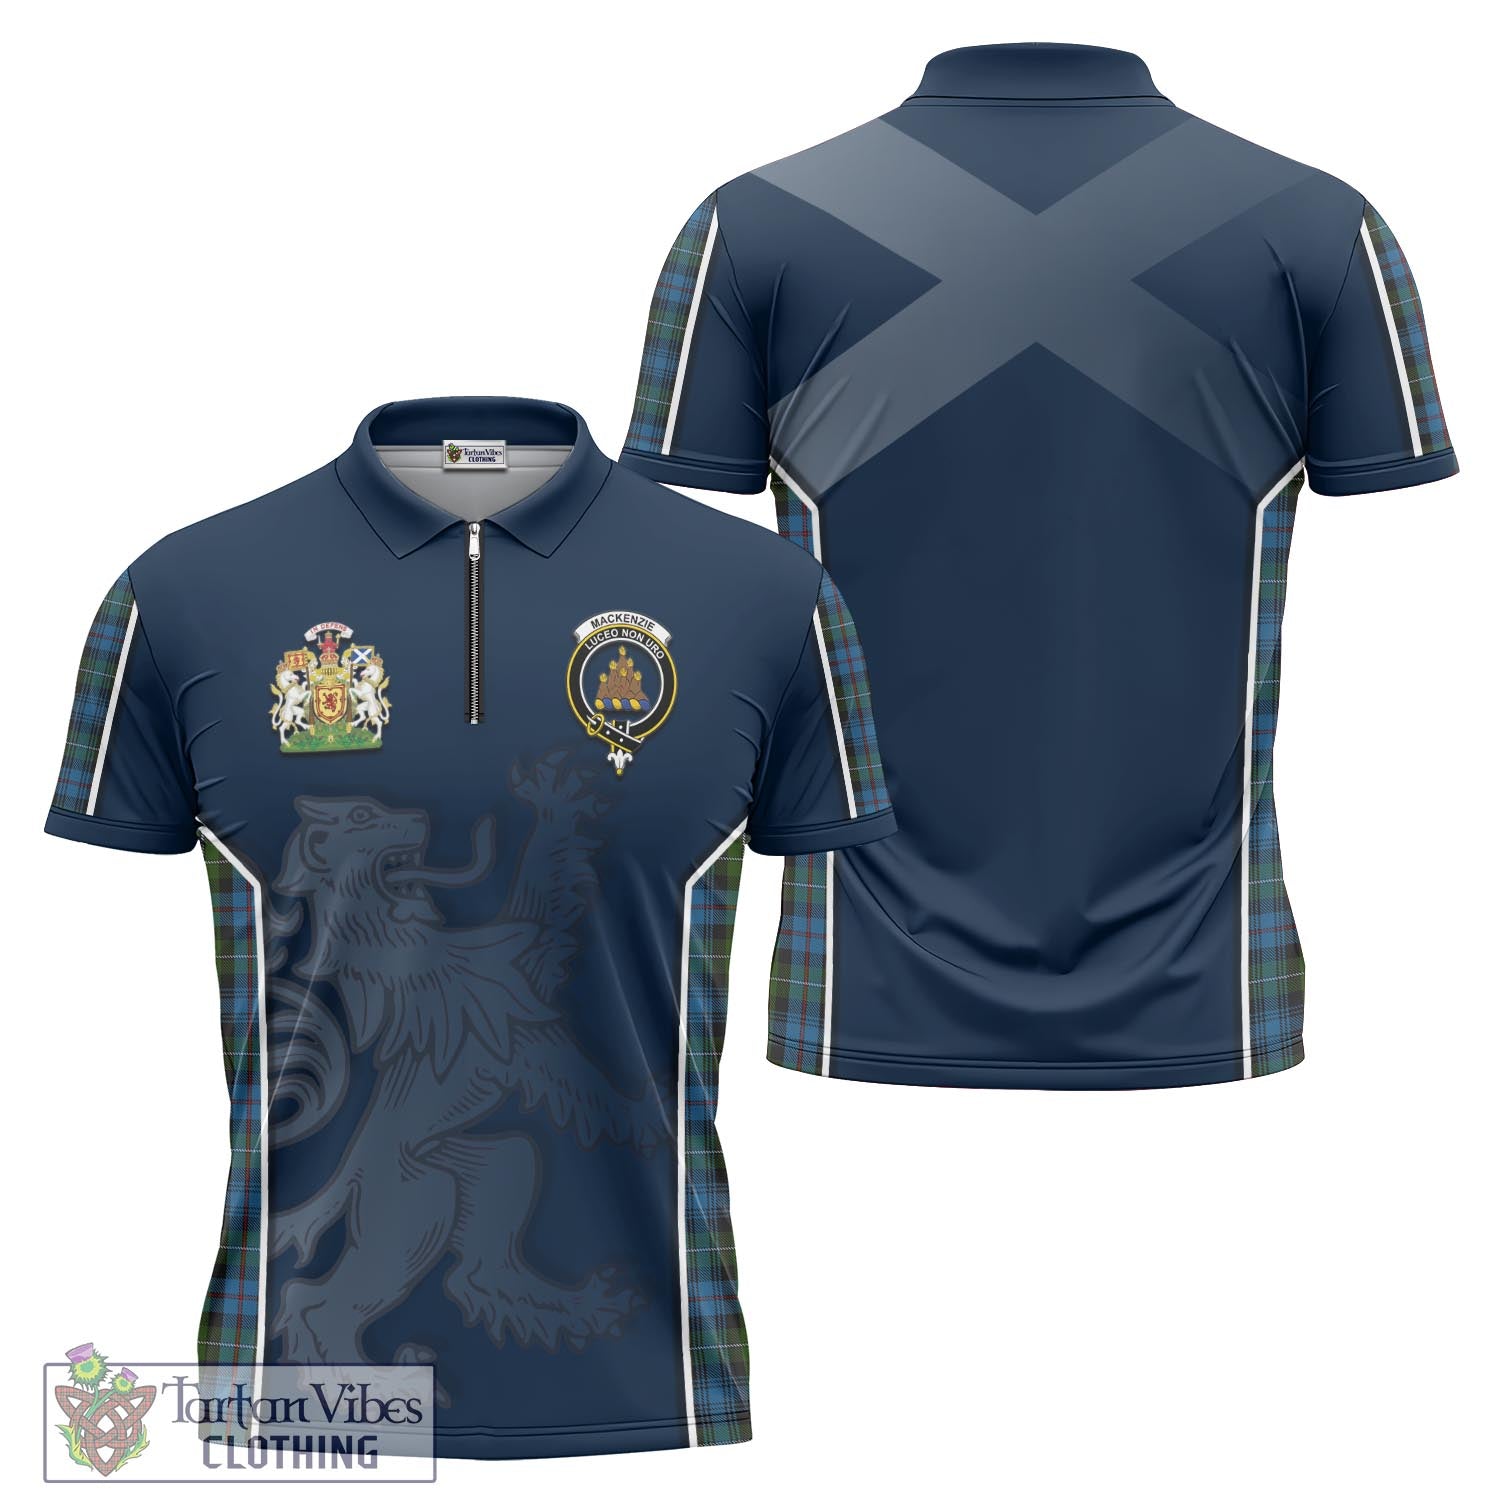 Tartan Vibes Clothing MacKenzie Tartan Zipper Polo Shirt with Family Crest and Lion Rampant Vibes Sport Style